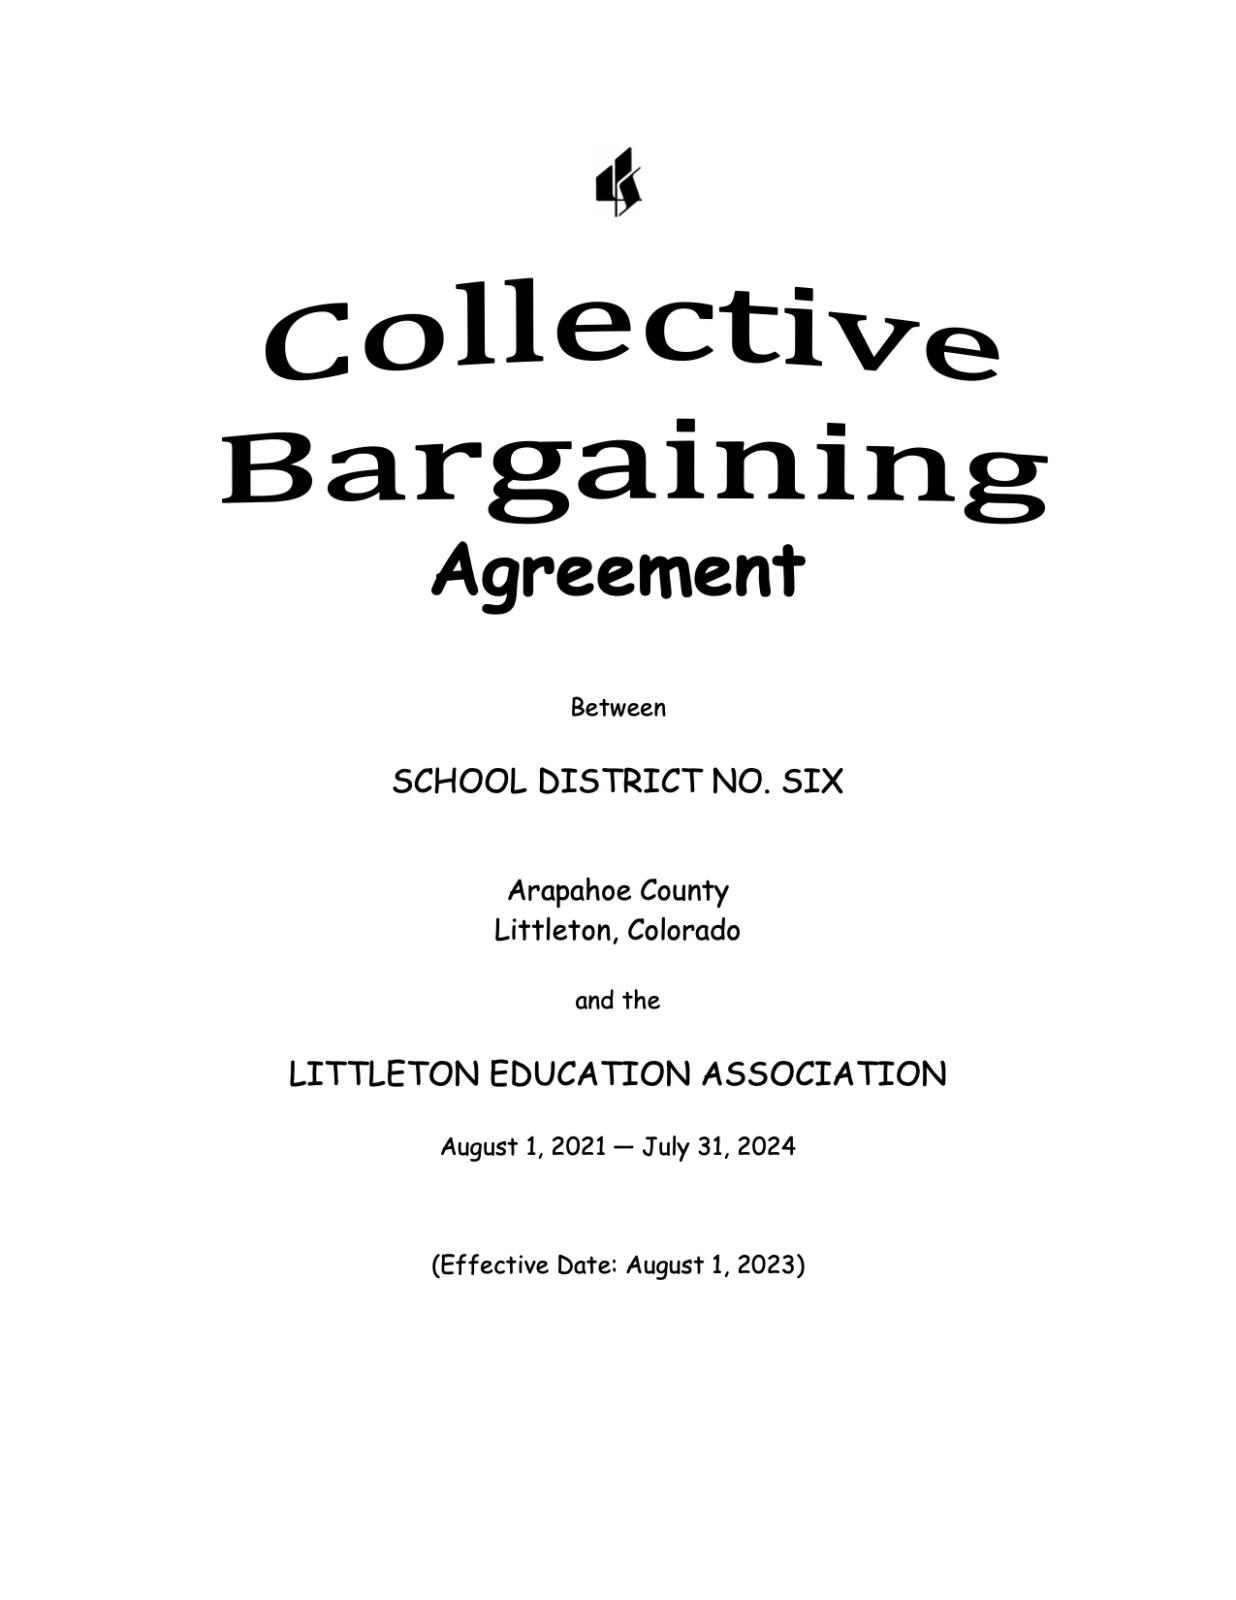 Collective Bargaining agreement between school district number 6 and the Littleton Education Assoc